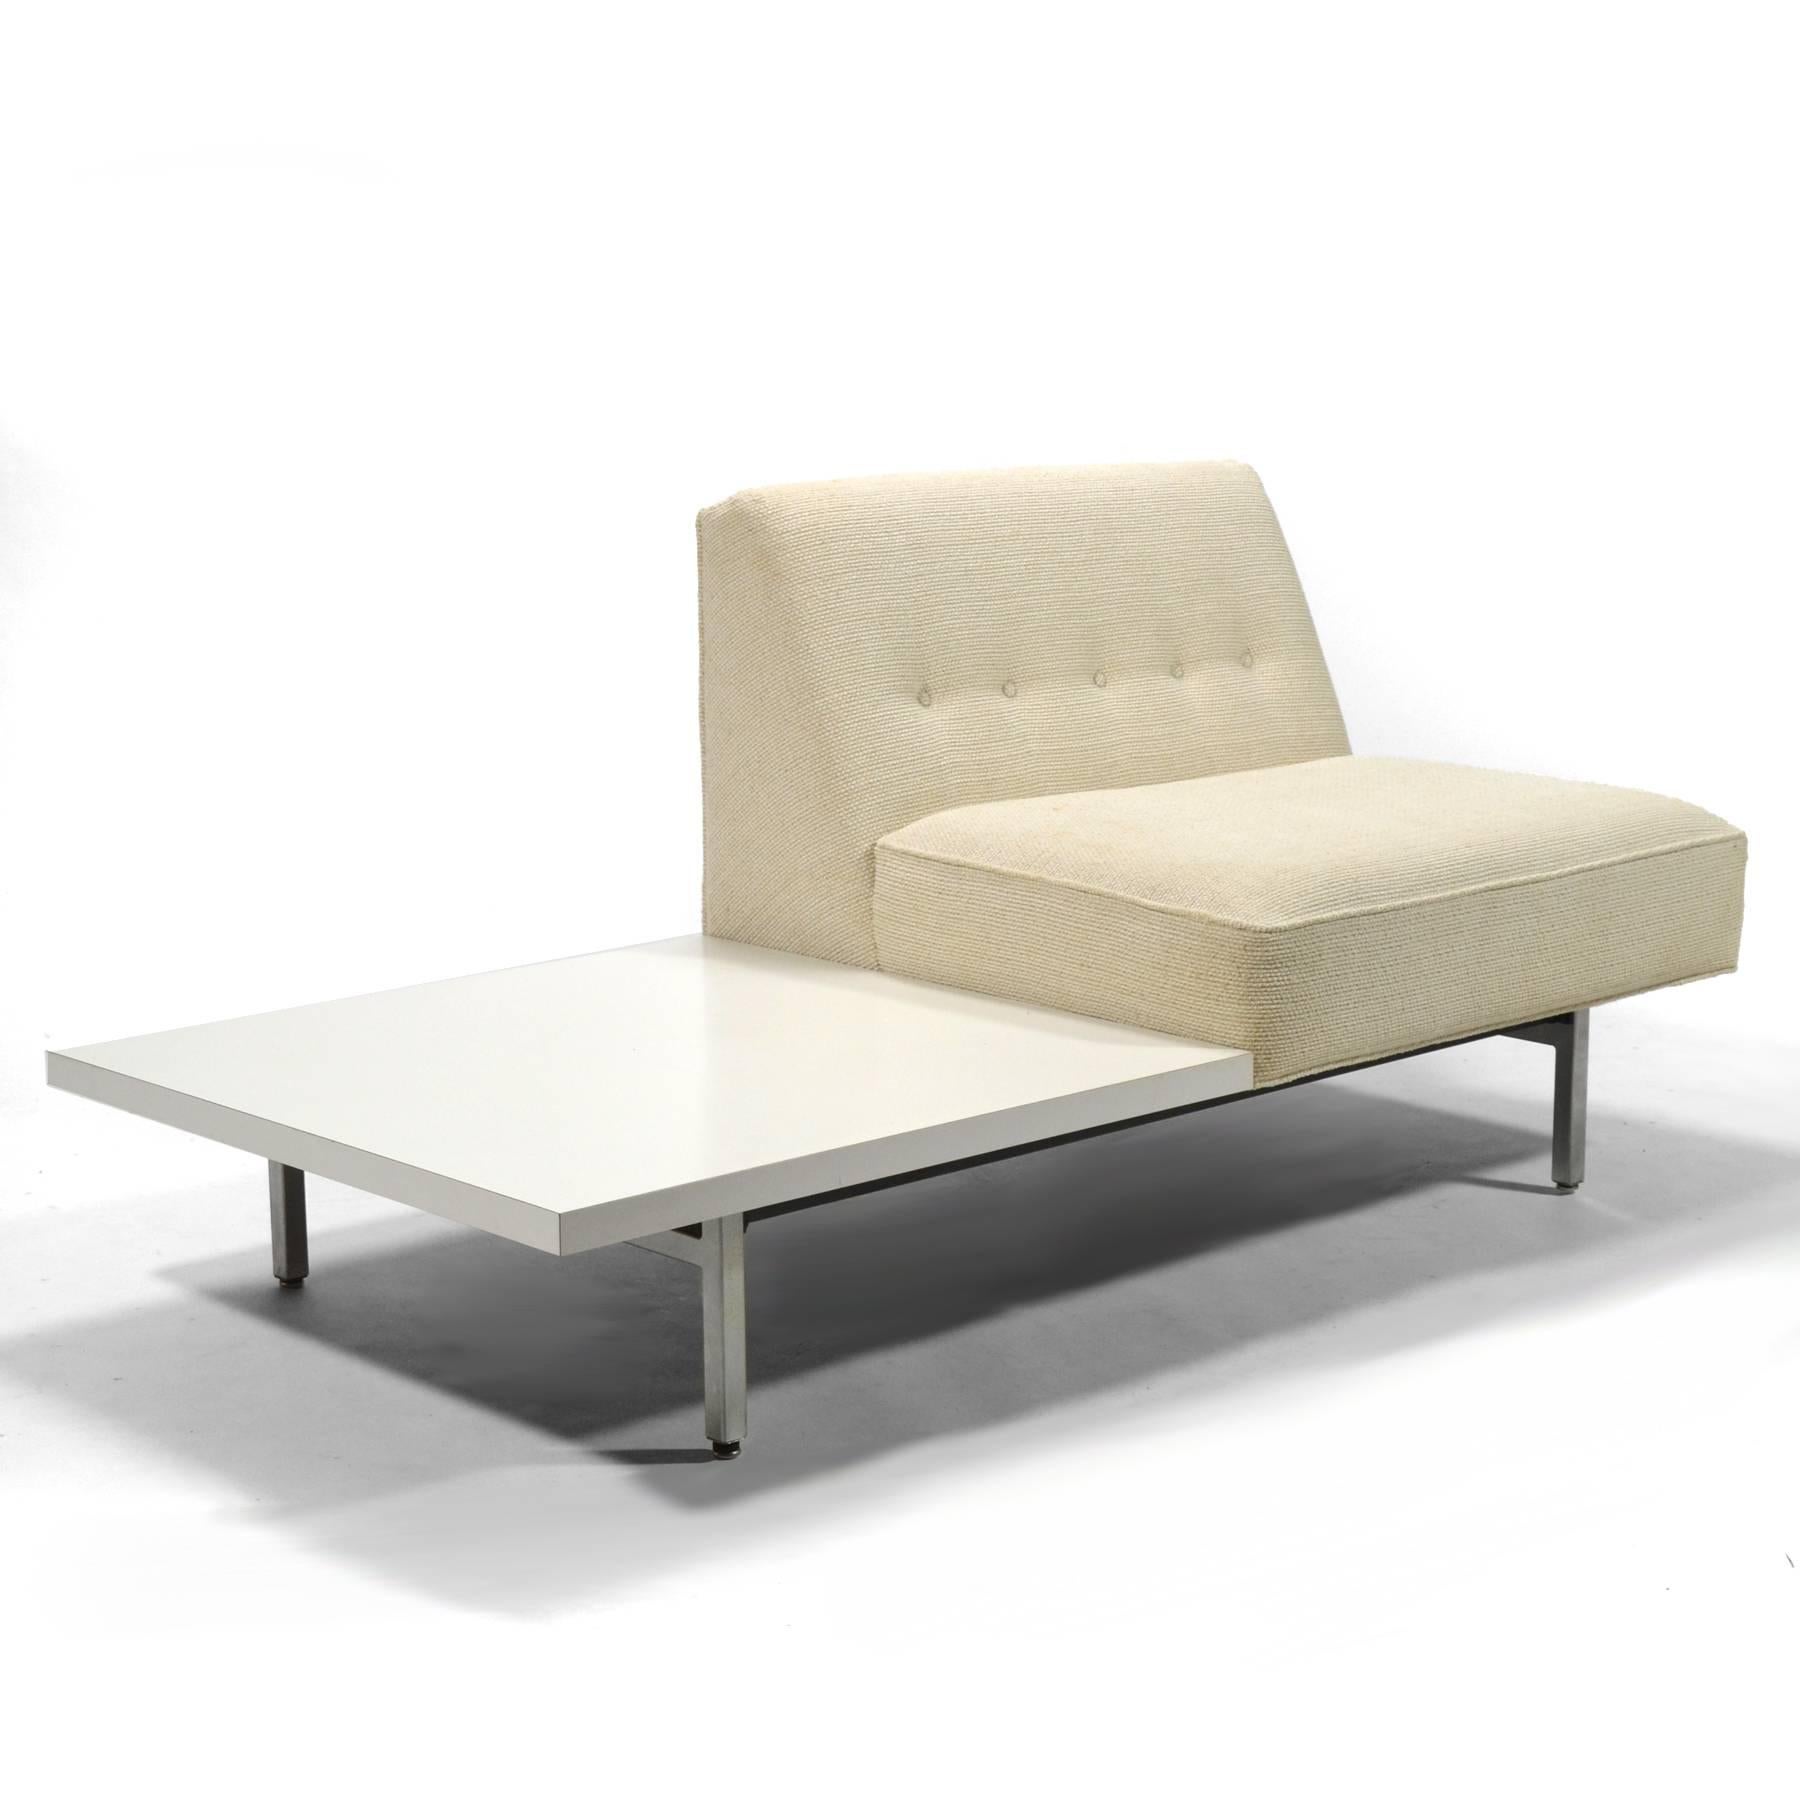 The modular seating group was designed by the Nelson office in 1955. It is designed on a 30